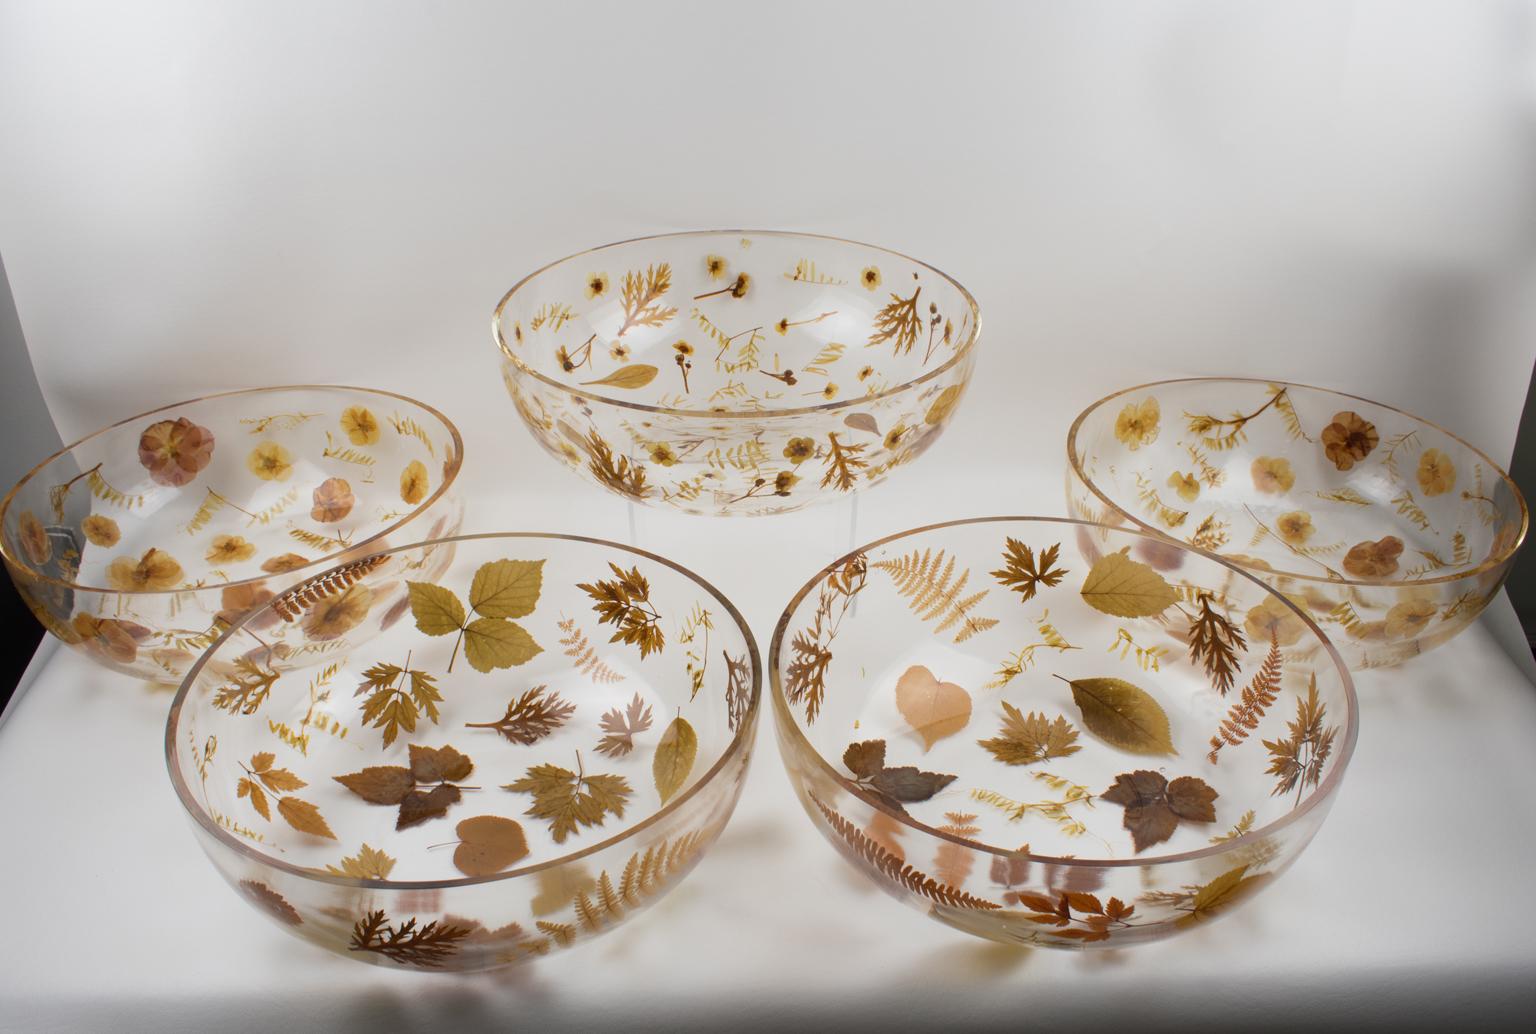 1970s Italian Resin Bowl Centerpiece with Leaves and Flowers Inclusions 1